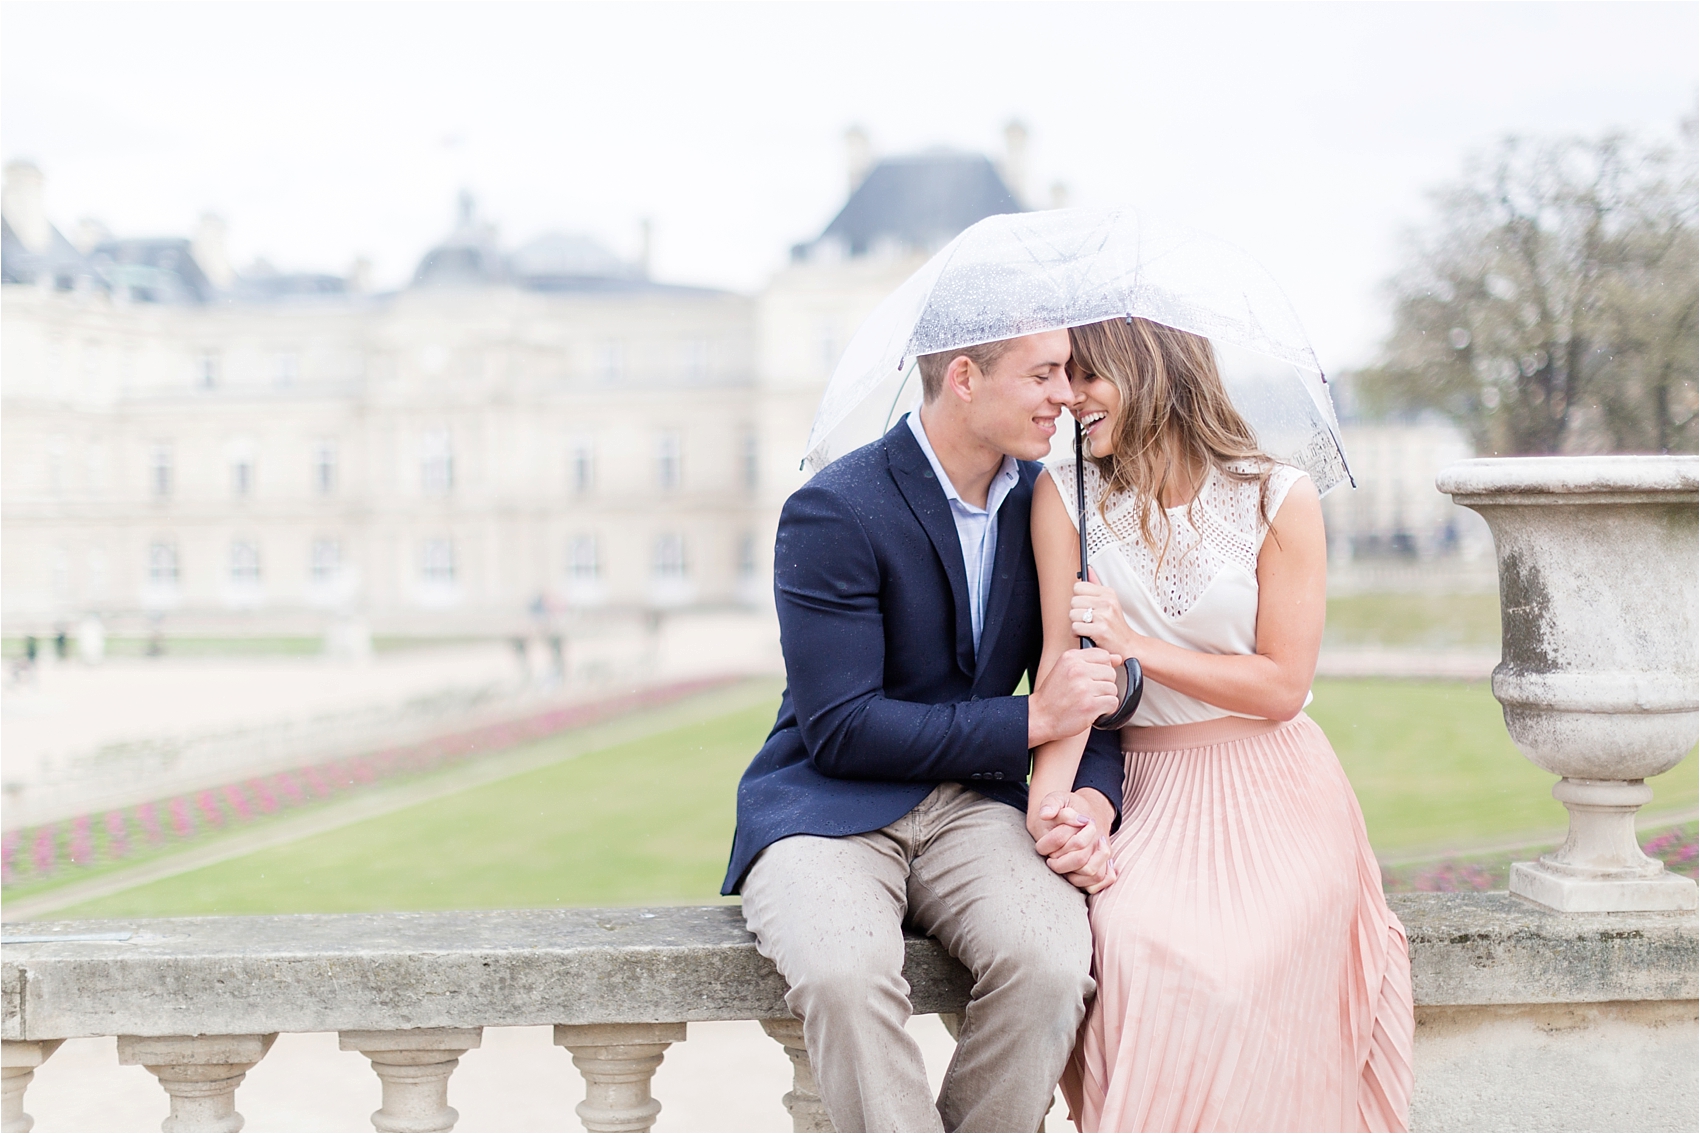 Paris Engagement at Luxembourg Gardens